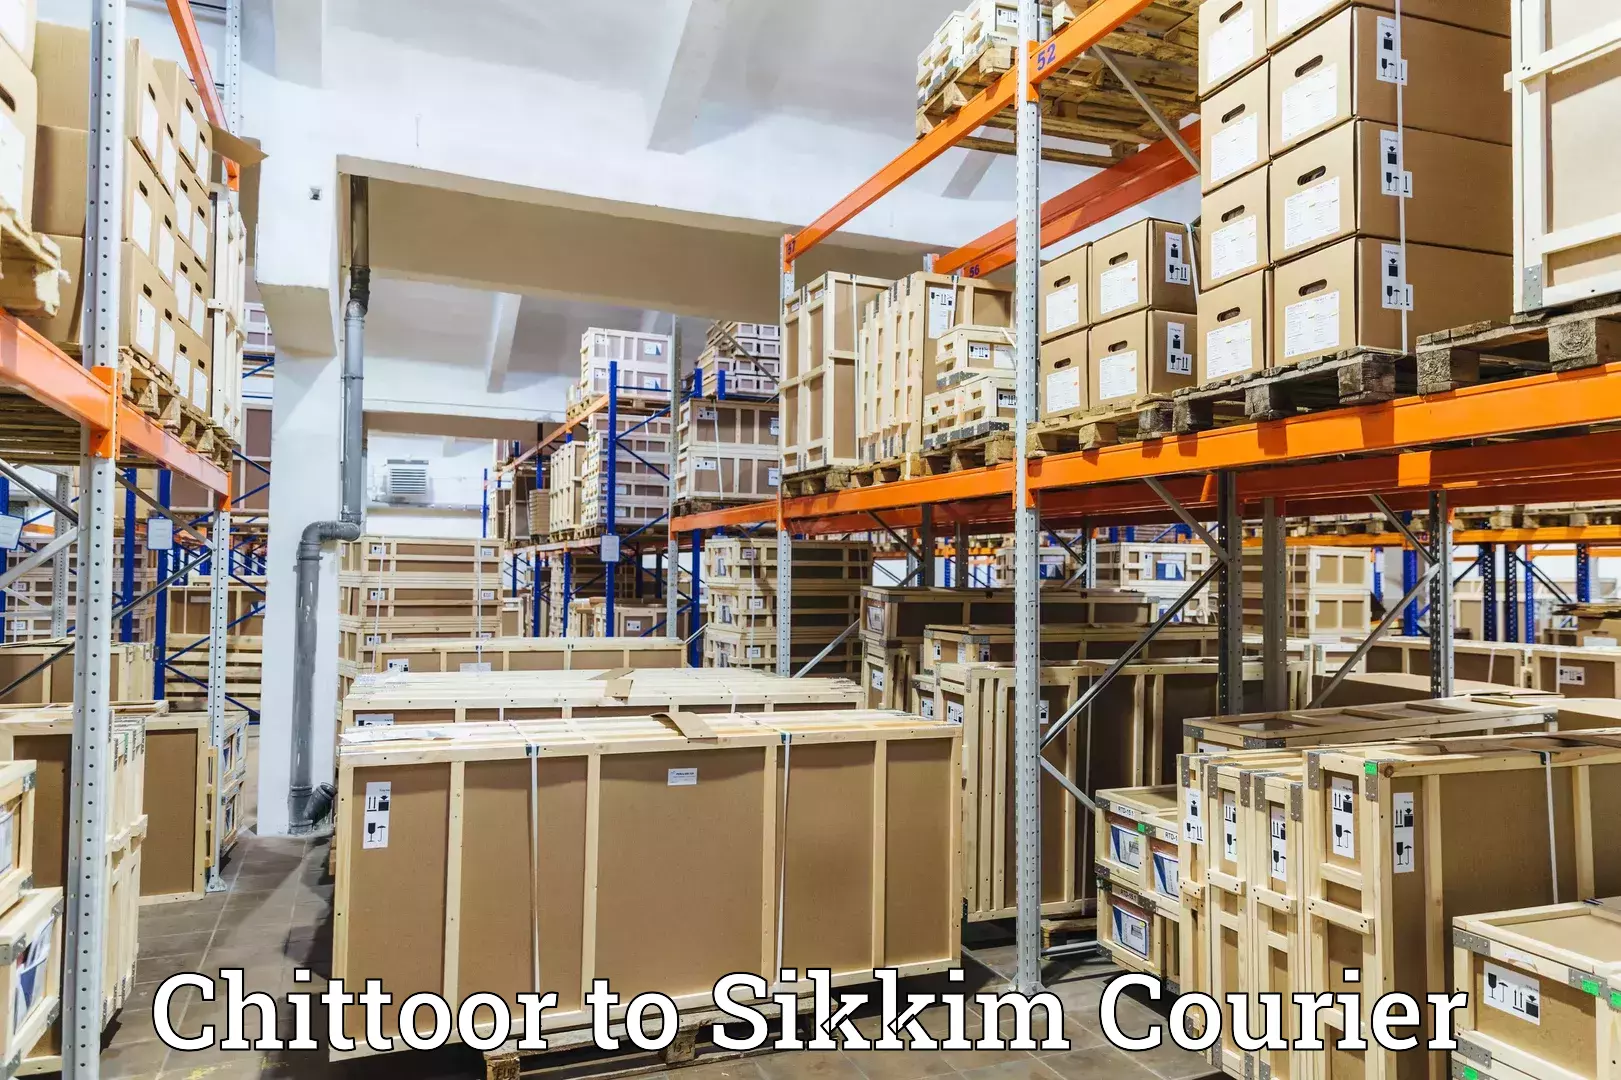 Pharmaceutical courier Chittoor to Sikkim